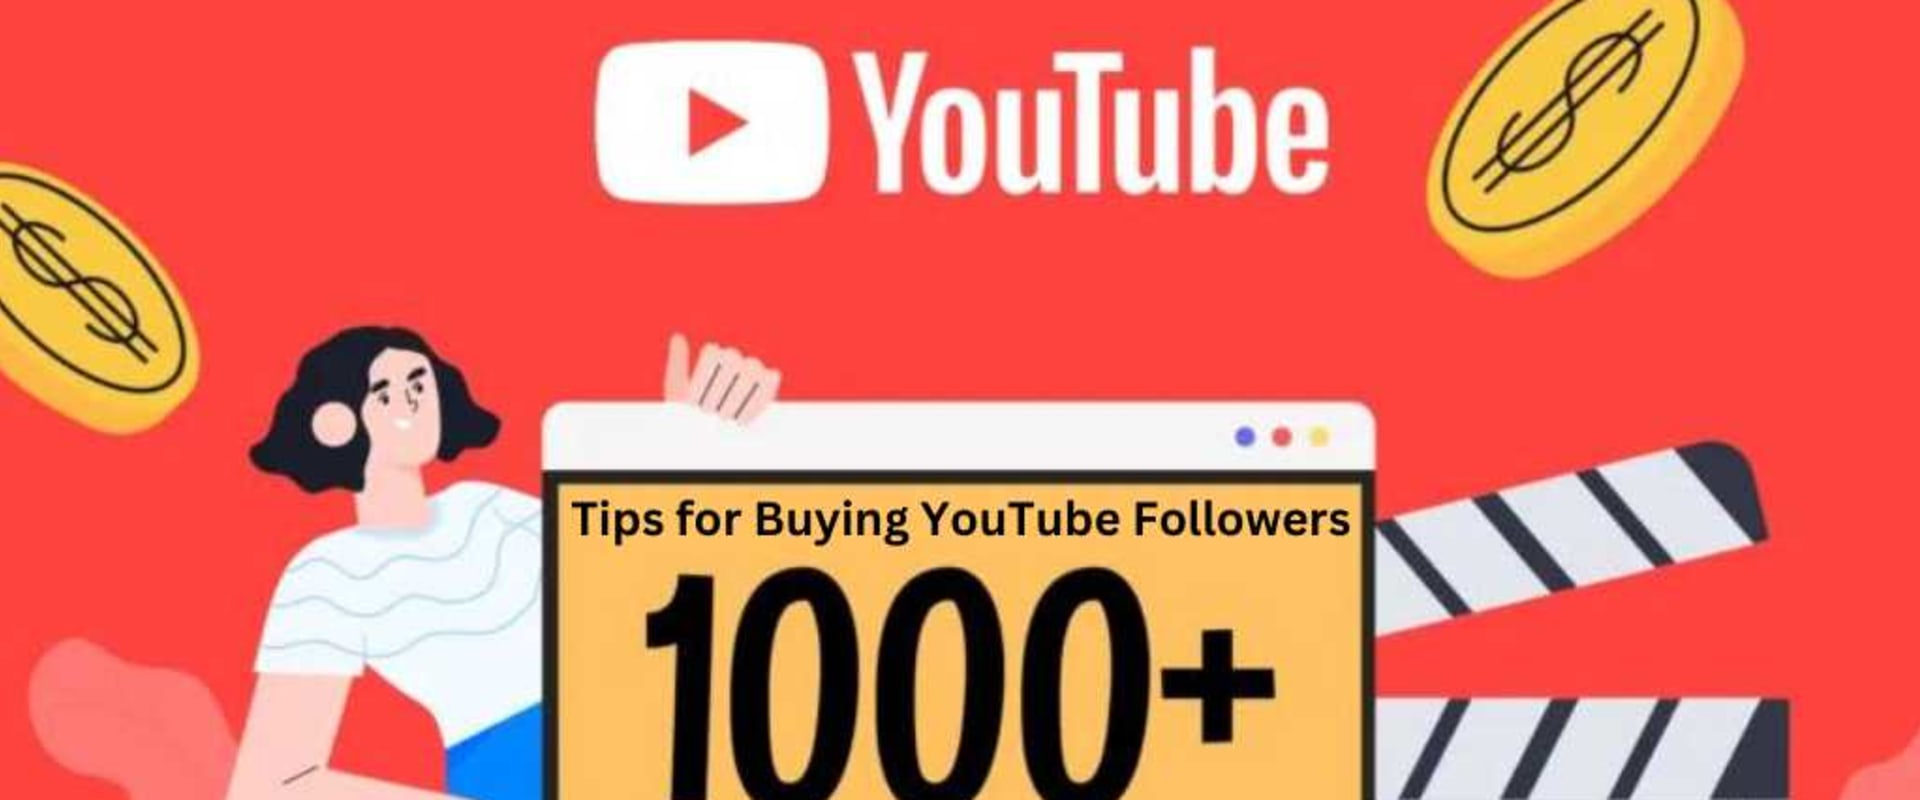 Tips for Buying YouTube Followers: Types and Benefits